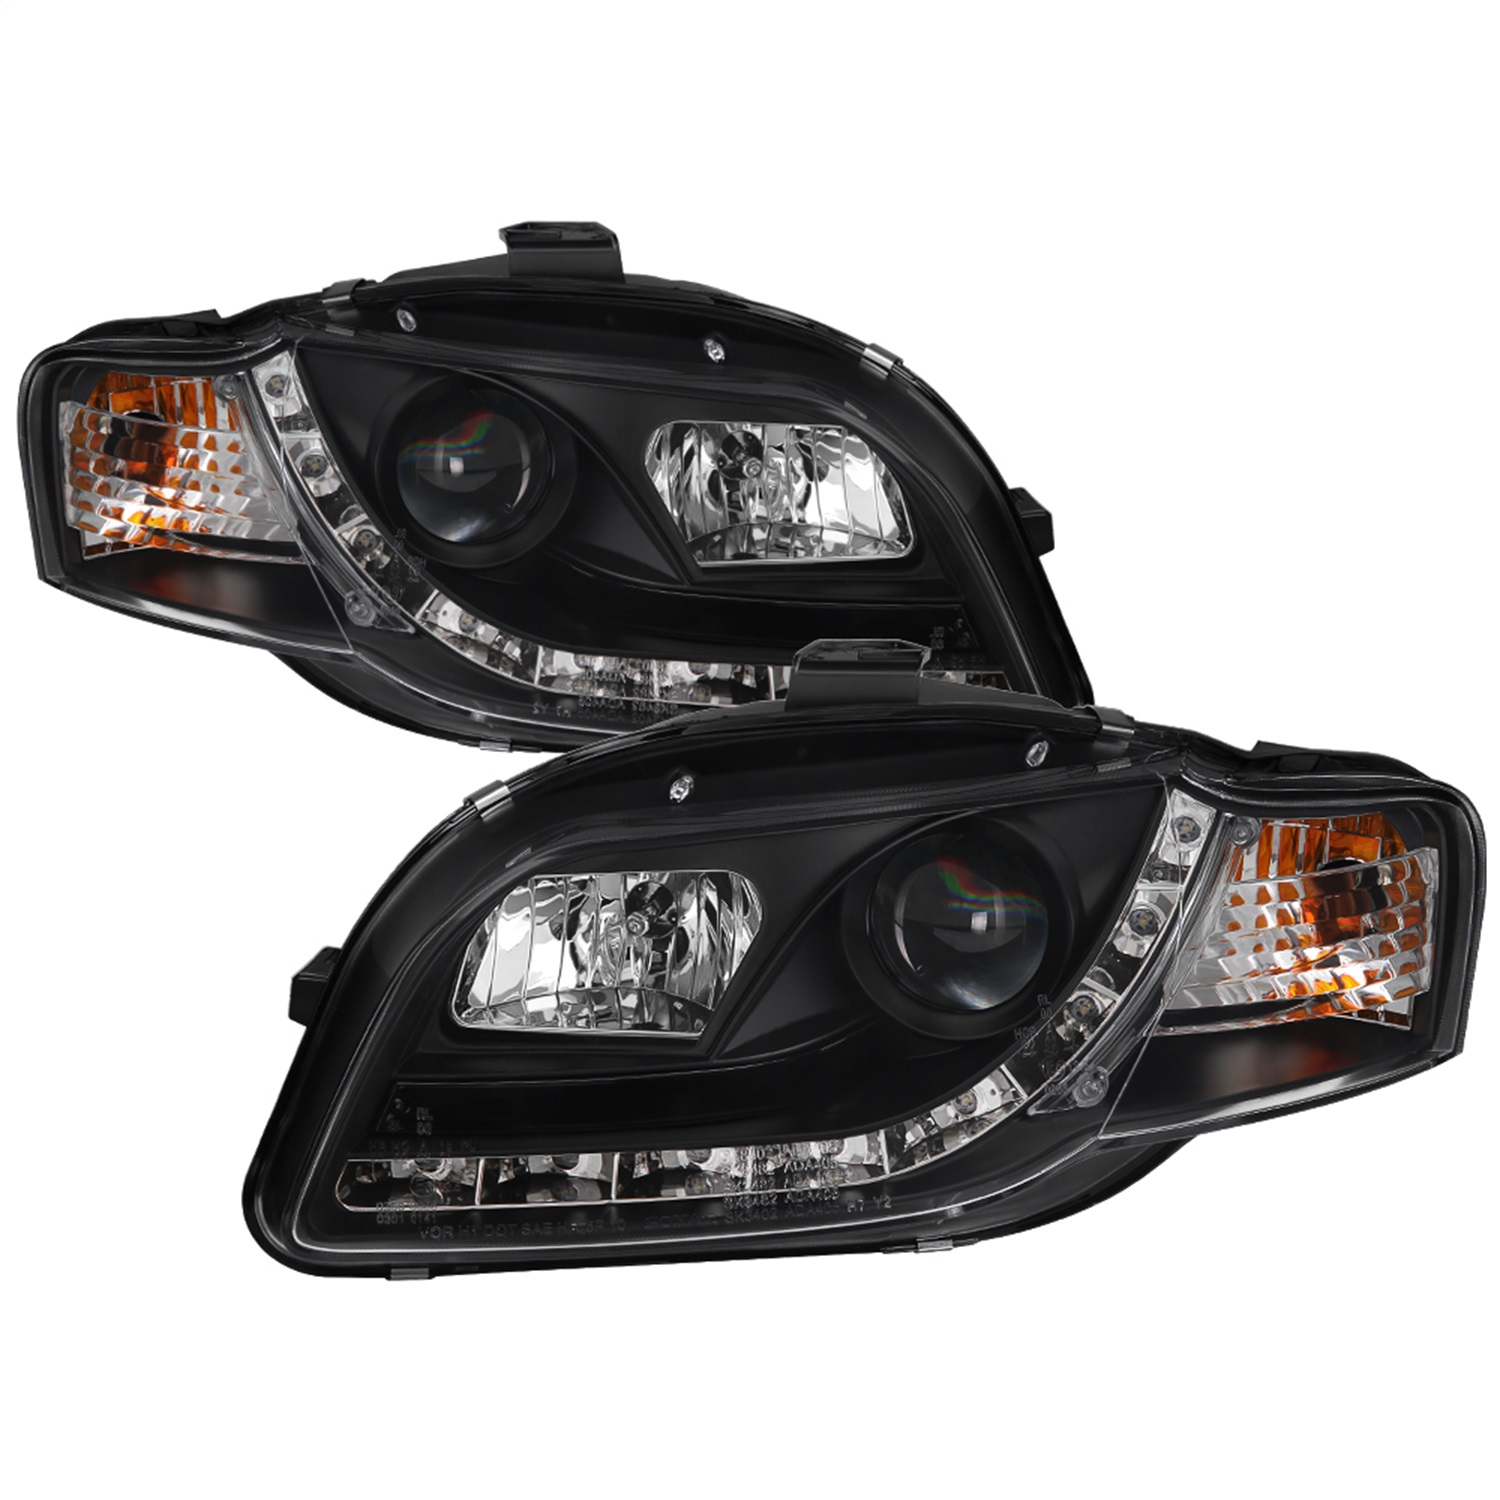 Spyder Auto 5008572 DRL LED Projector Headlights Fits 06-08 A4 A4 Quattro